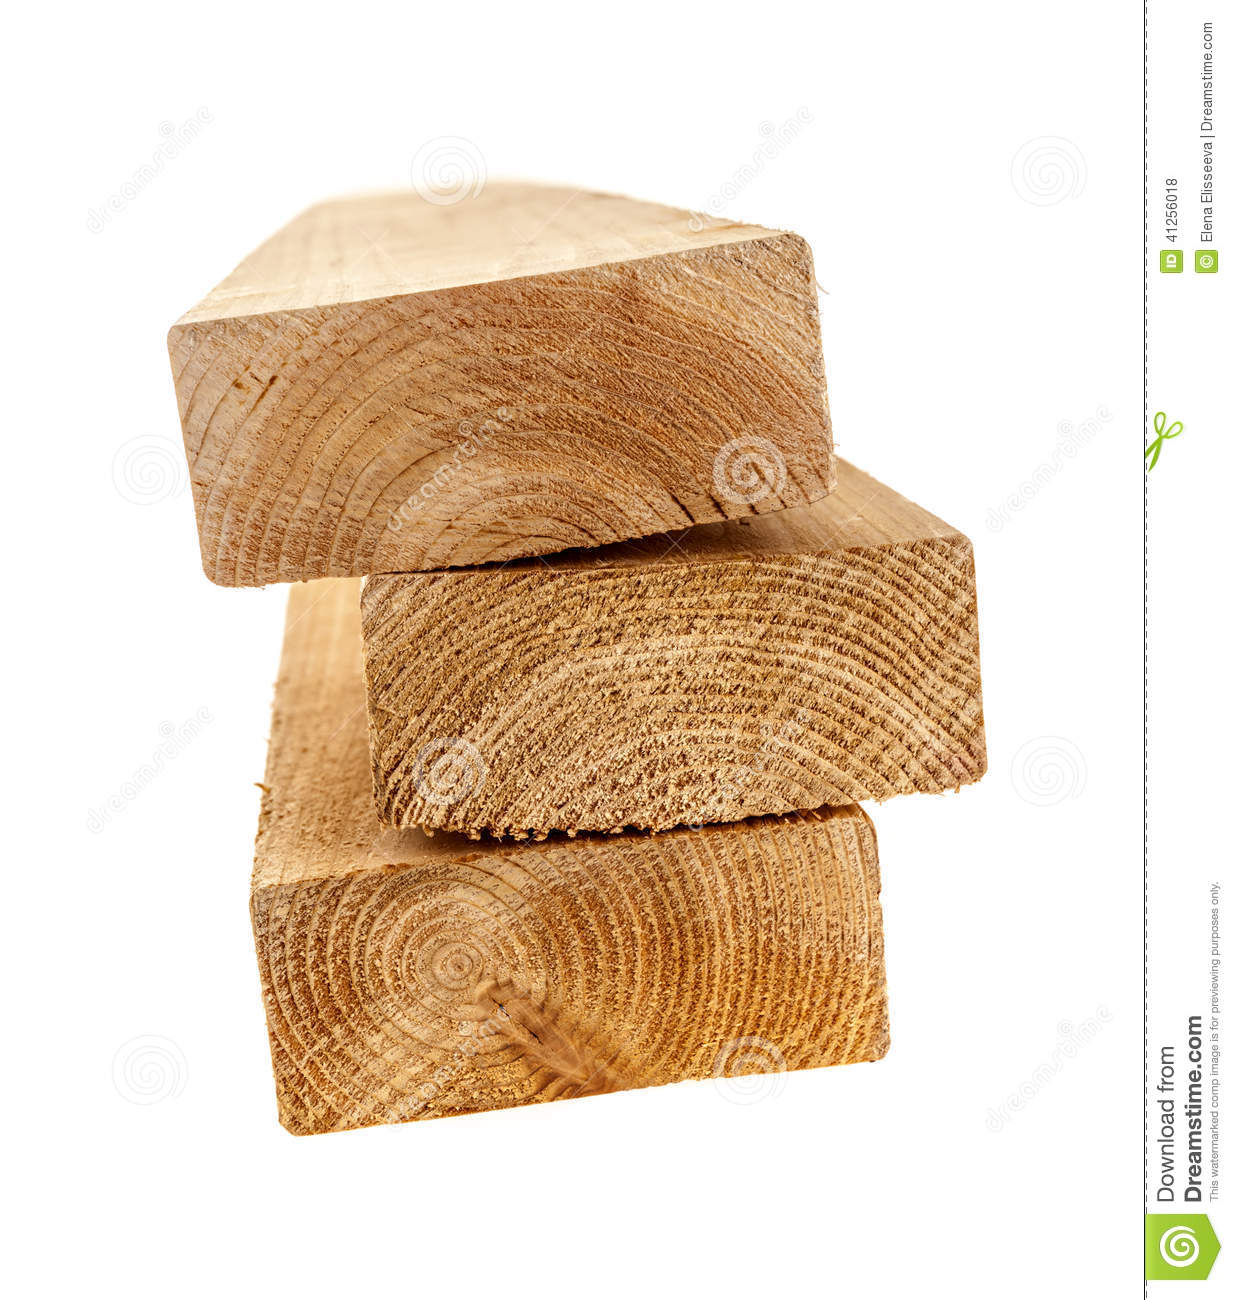 Edge Of Three Cedar Two By Four Wood Boards On White Background